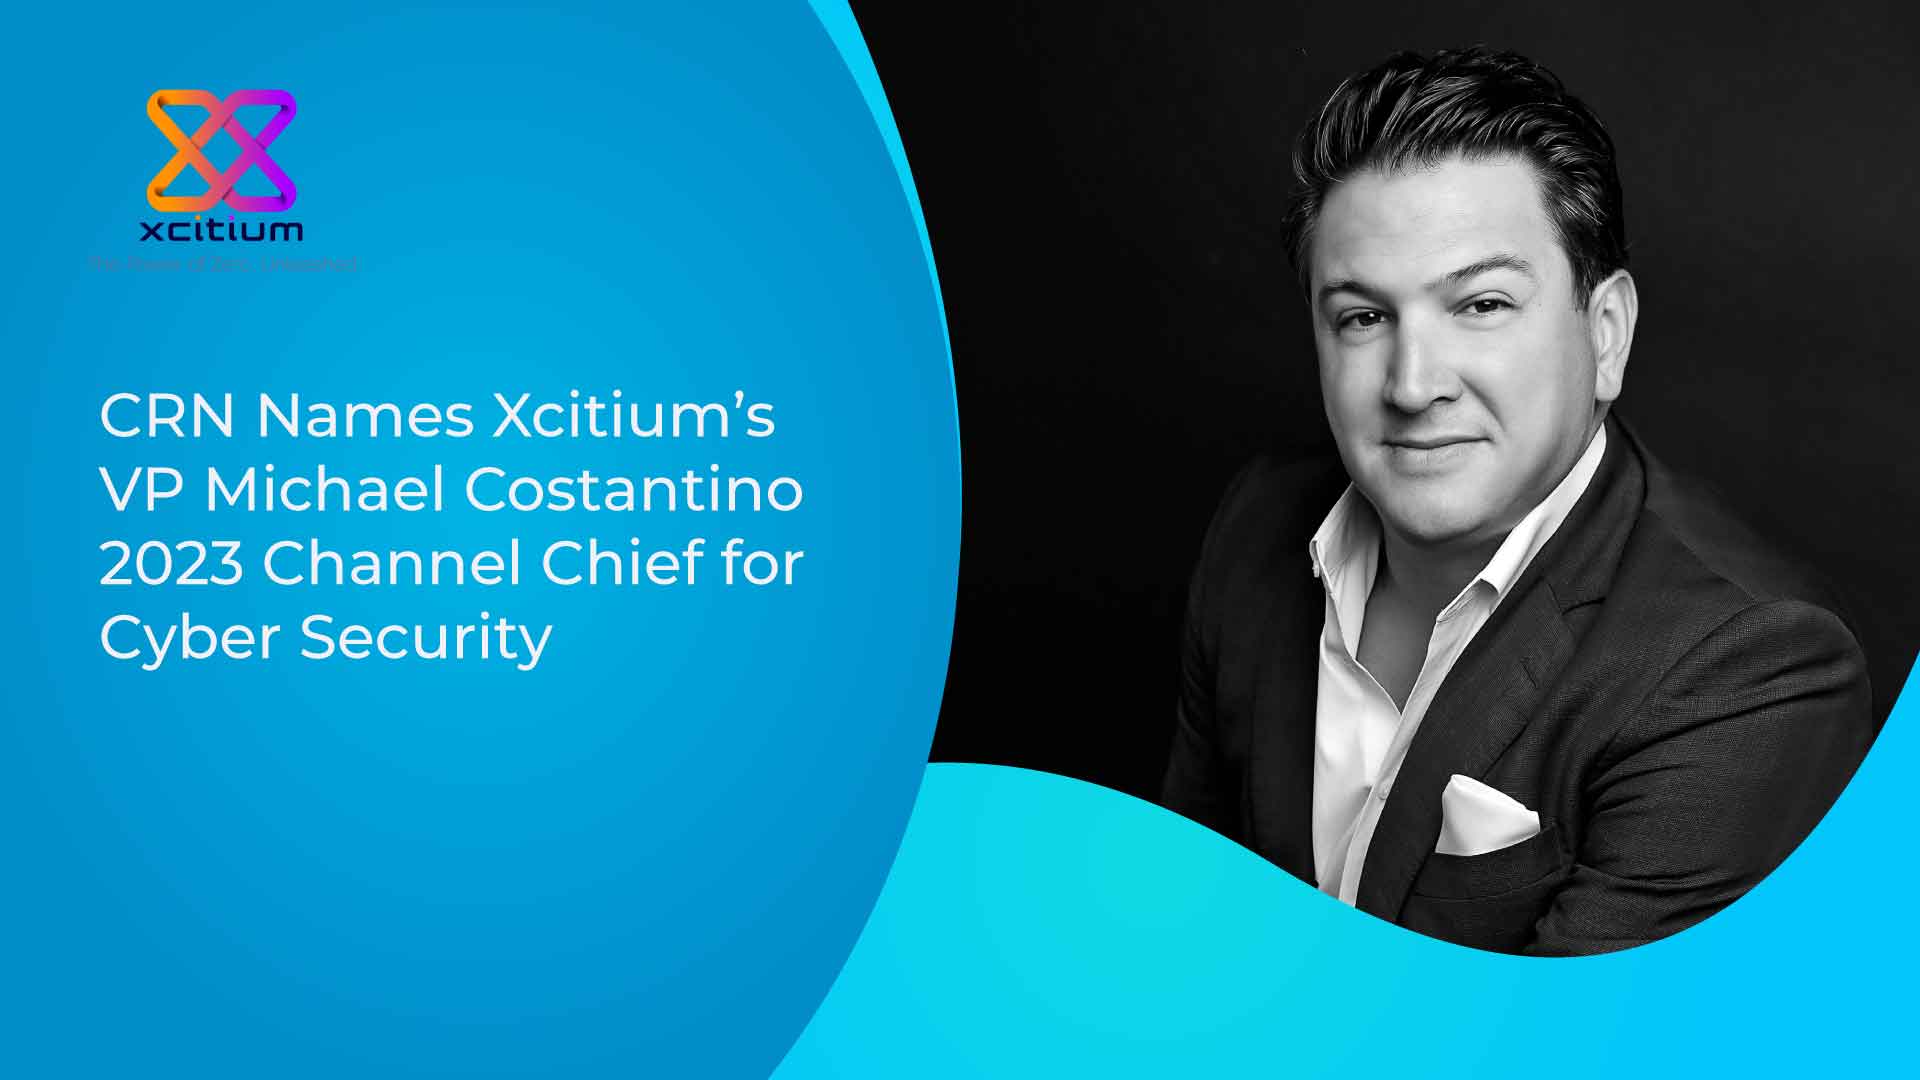 CRN Names Xcitium’s VP Michael Costantino 2023 Channel Chief for Cyber Security